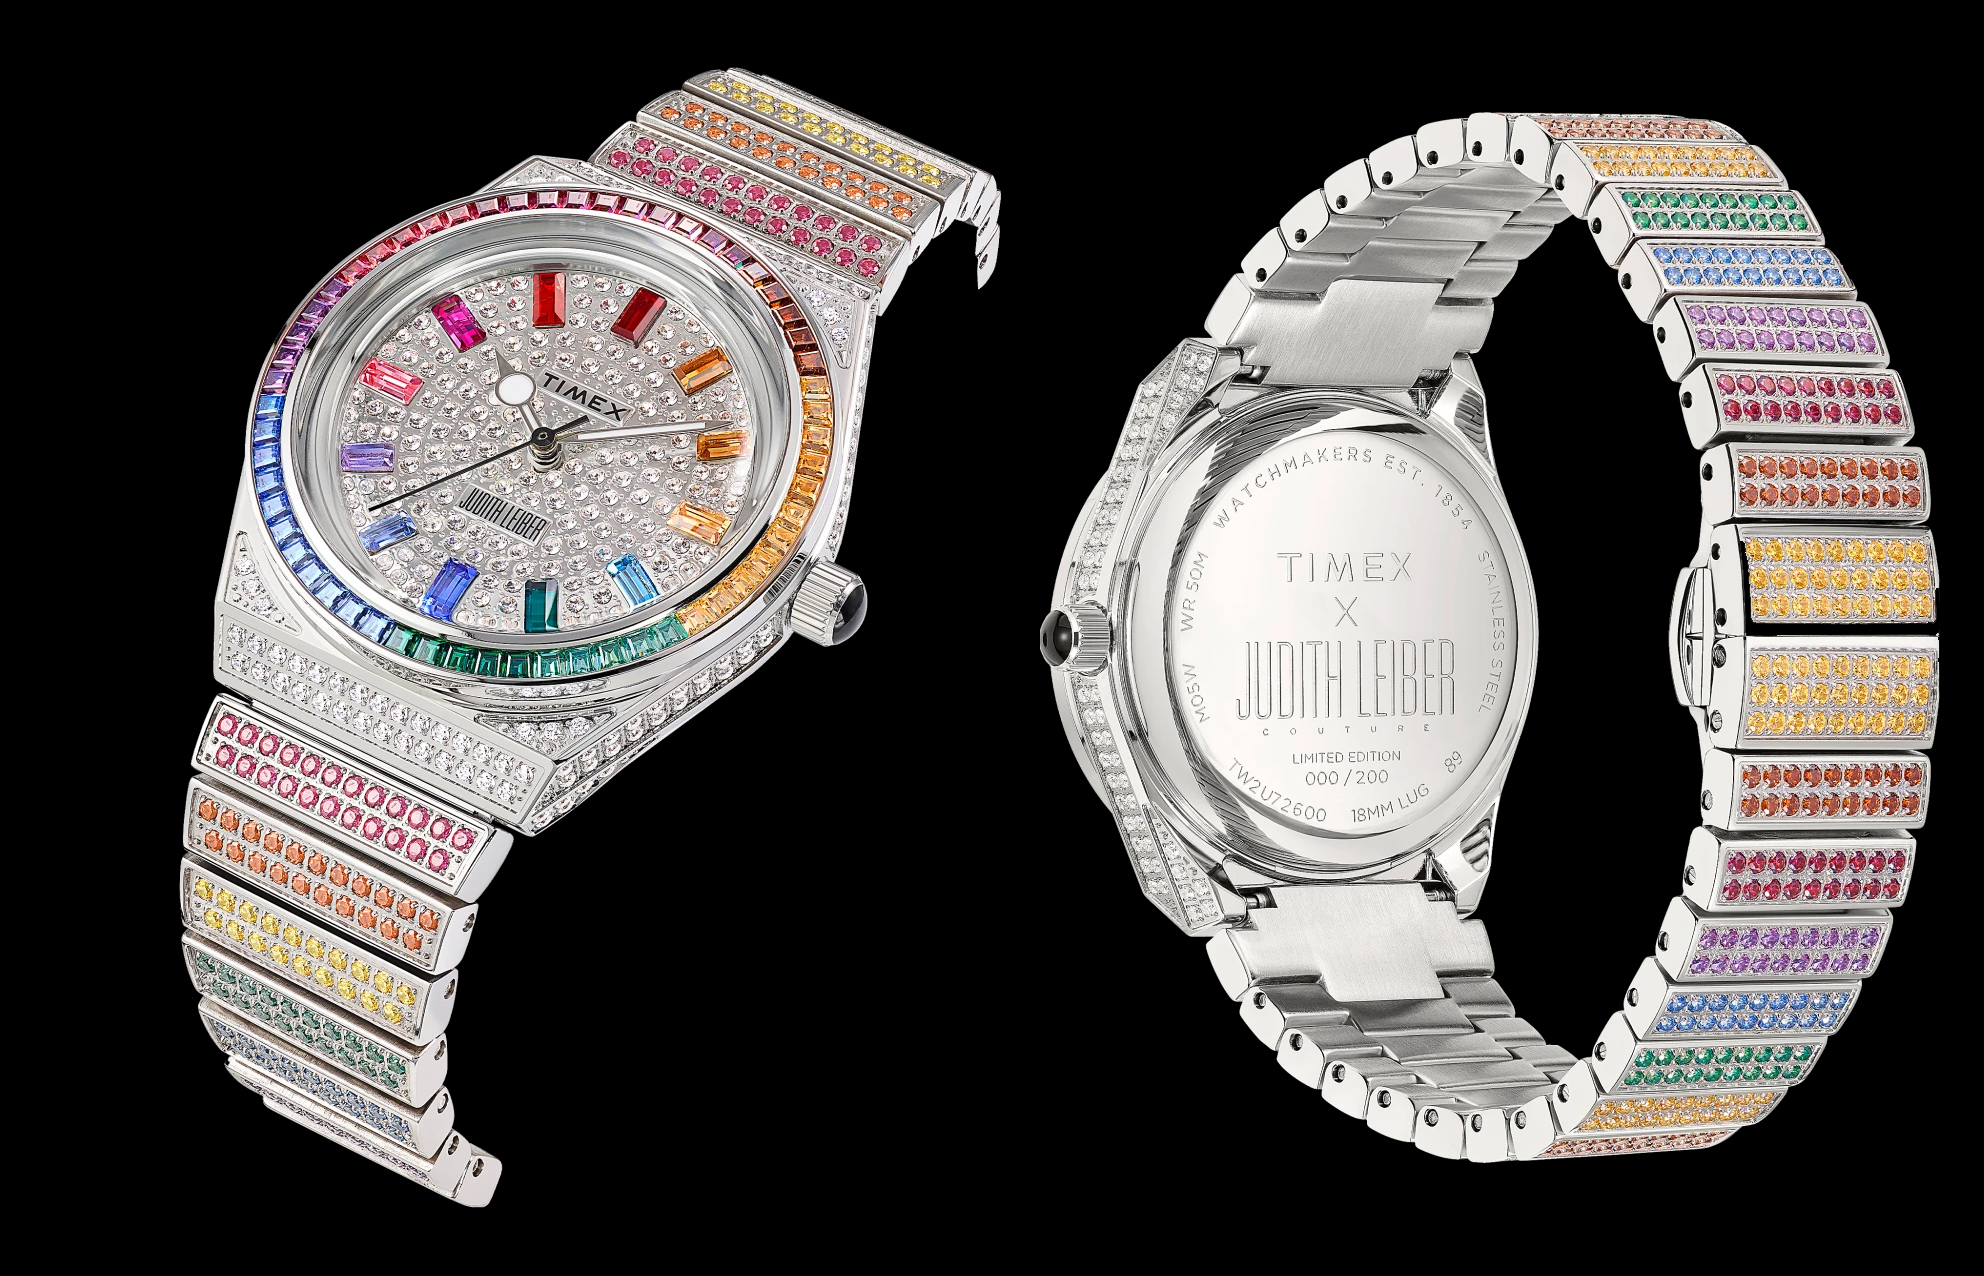 Judith Leiber Couture signs licensing deal with Timex watches